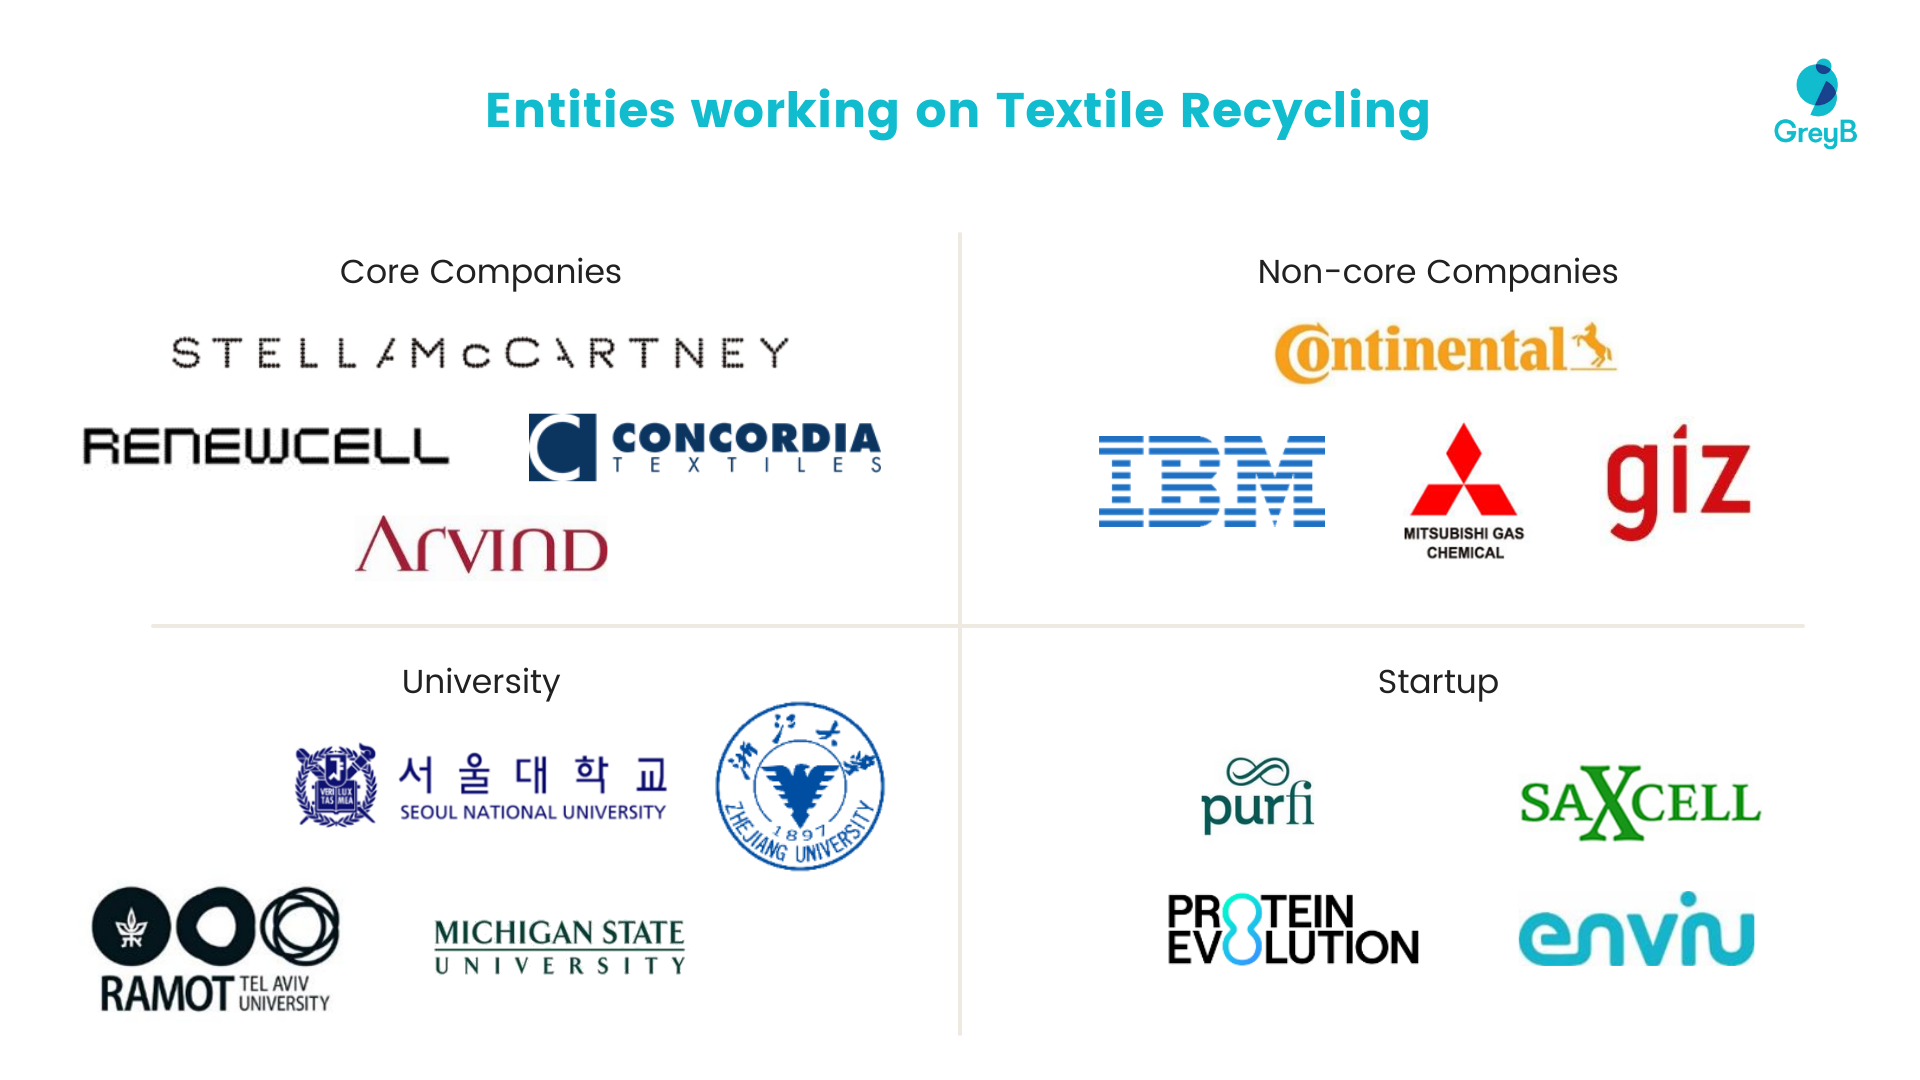 Entities working on Textile Recycling